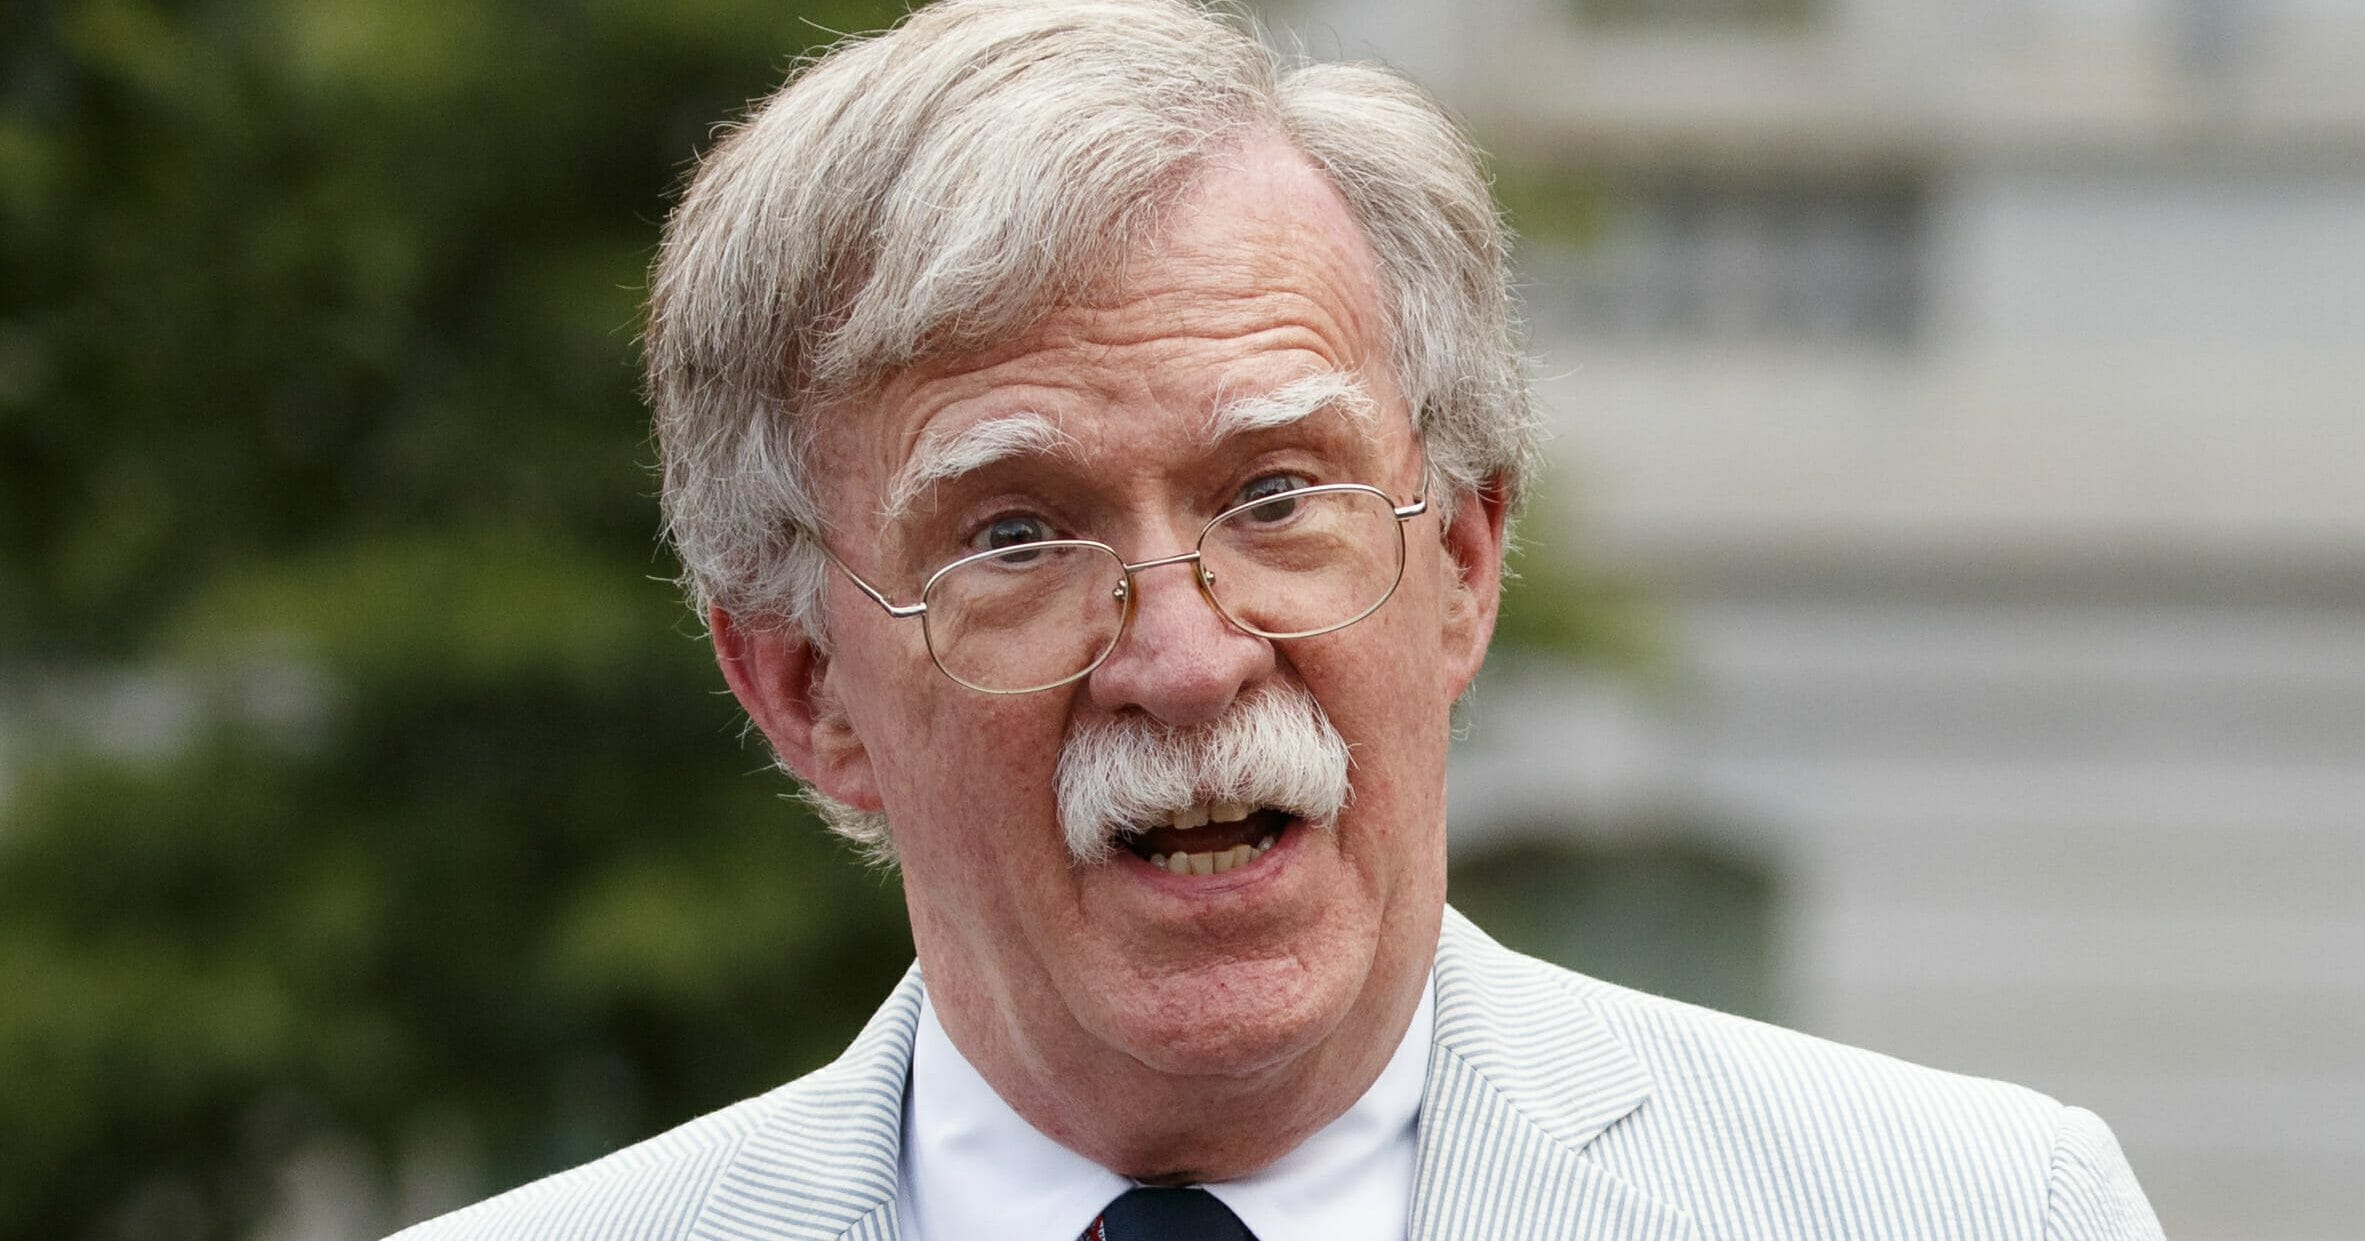 John Bolton speaks to the media at the White House in Washington on July 31, 2019, when he was national security adviser.